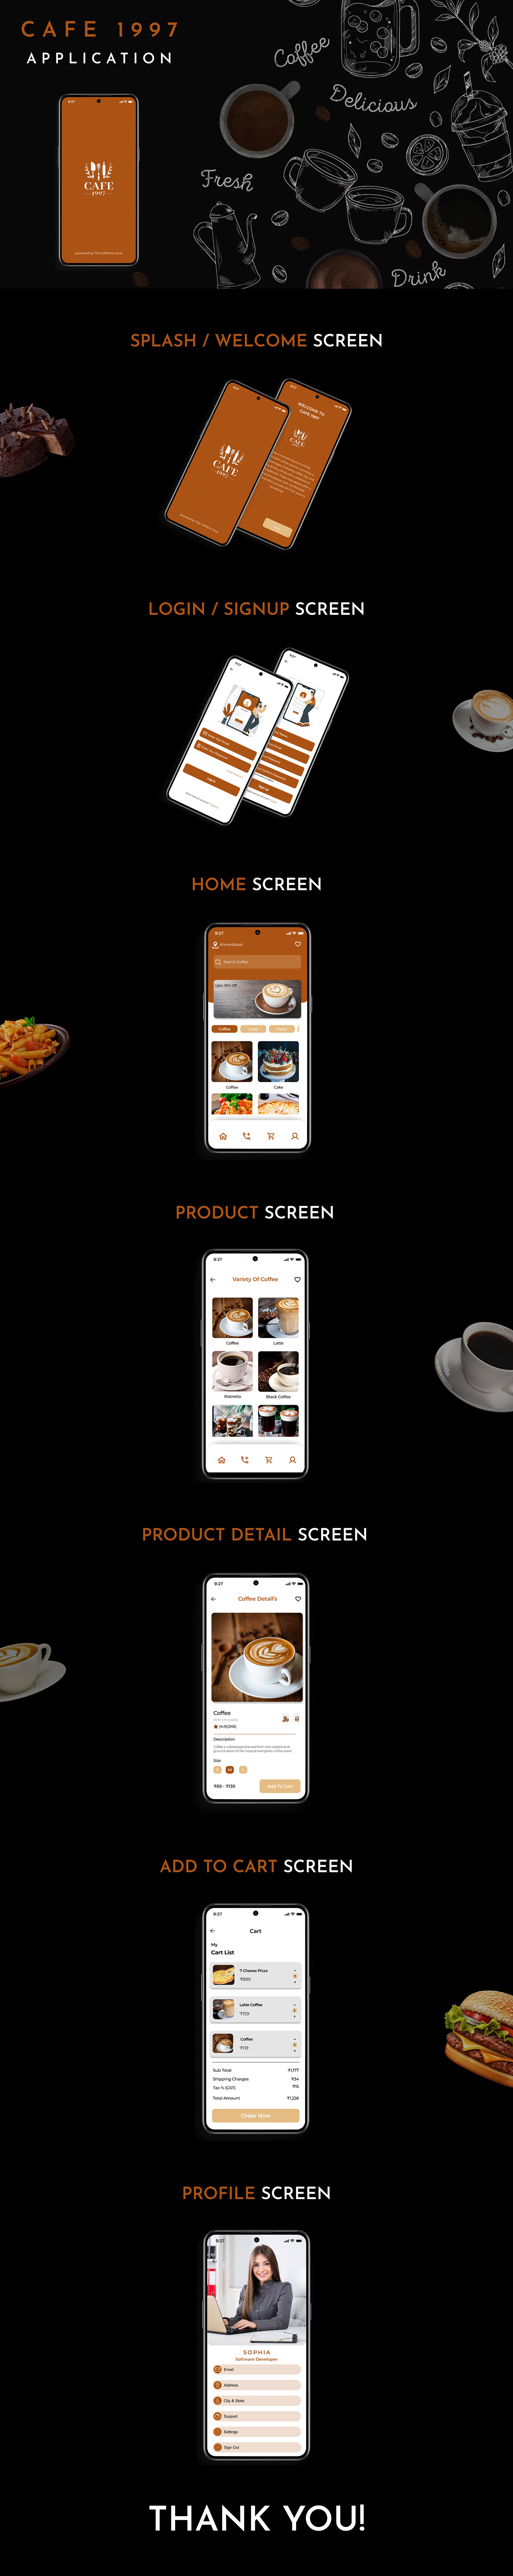 cafe Coffee Food  restaurant Fast food Pasta MobileUIUX mobileapp Android App Pizza